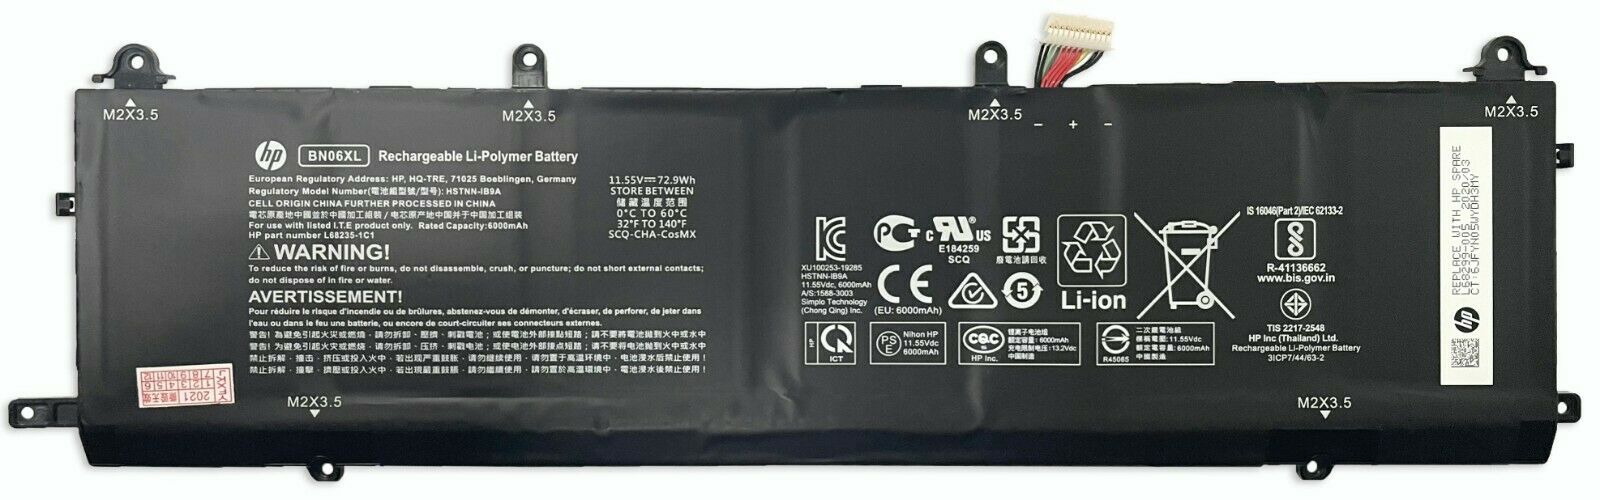 HP Spectre x360 15-eb0022tx Battery 6-cell 72.9Wh